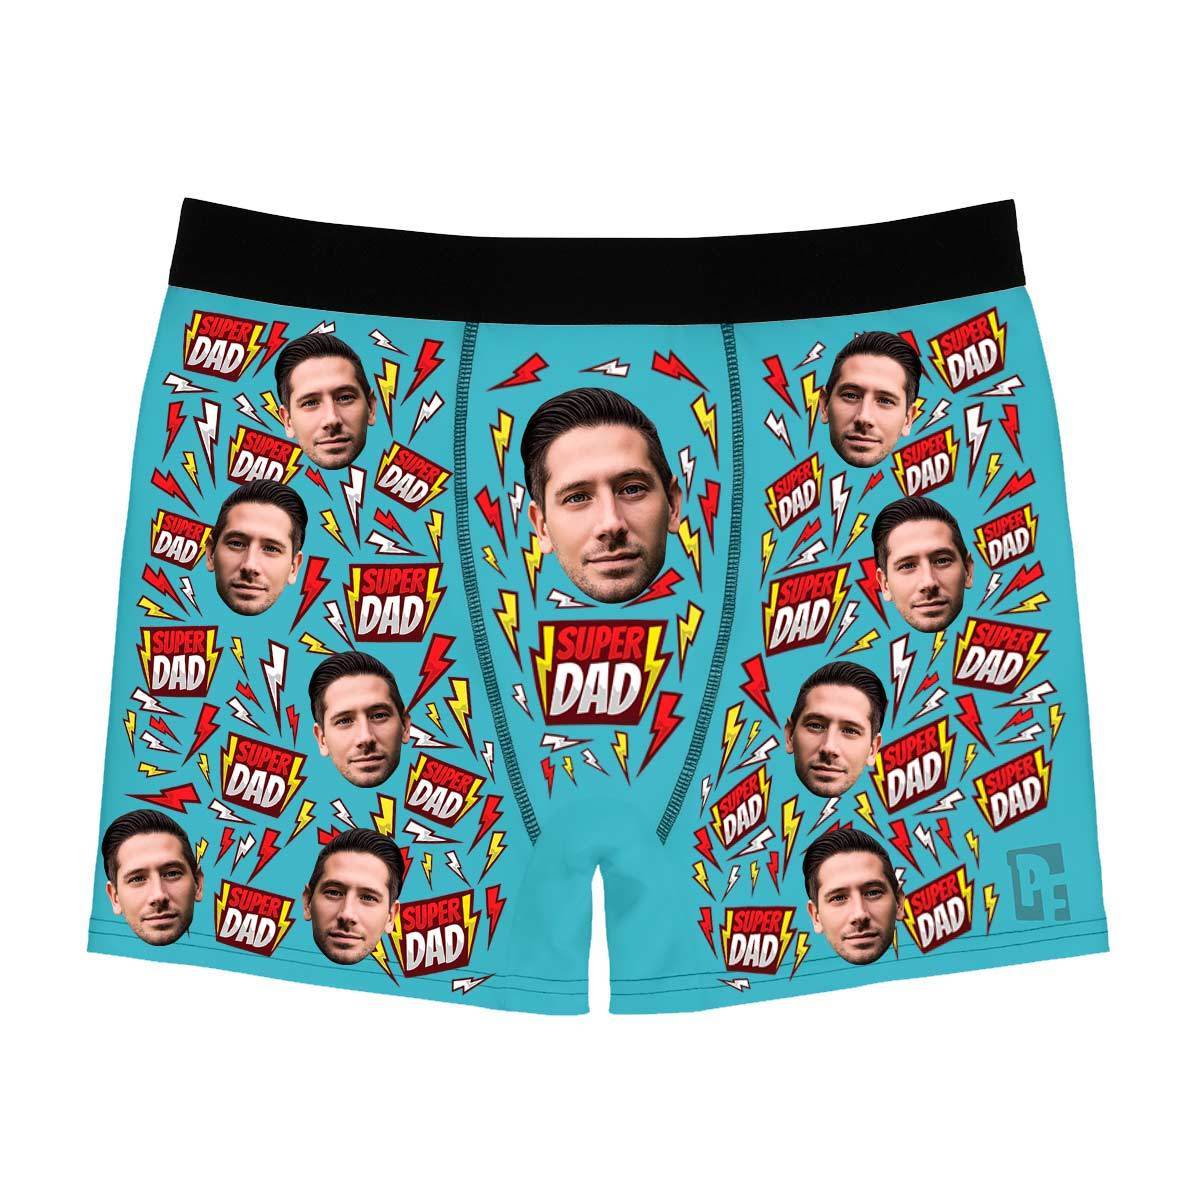 Blue Super dad men's boxer briefs personalized with photo printed on them